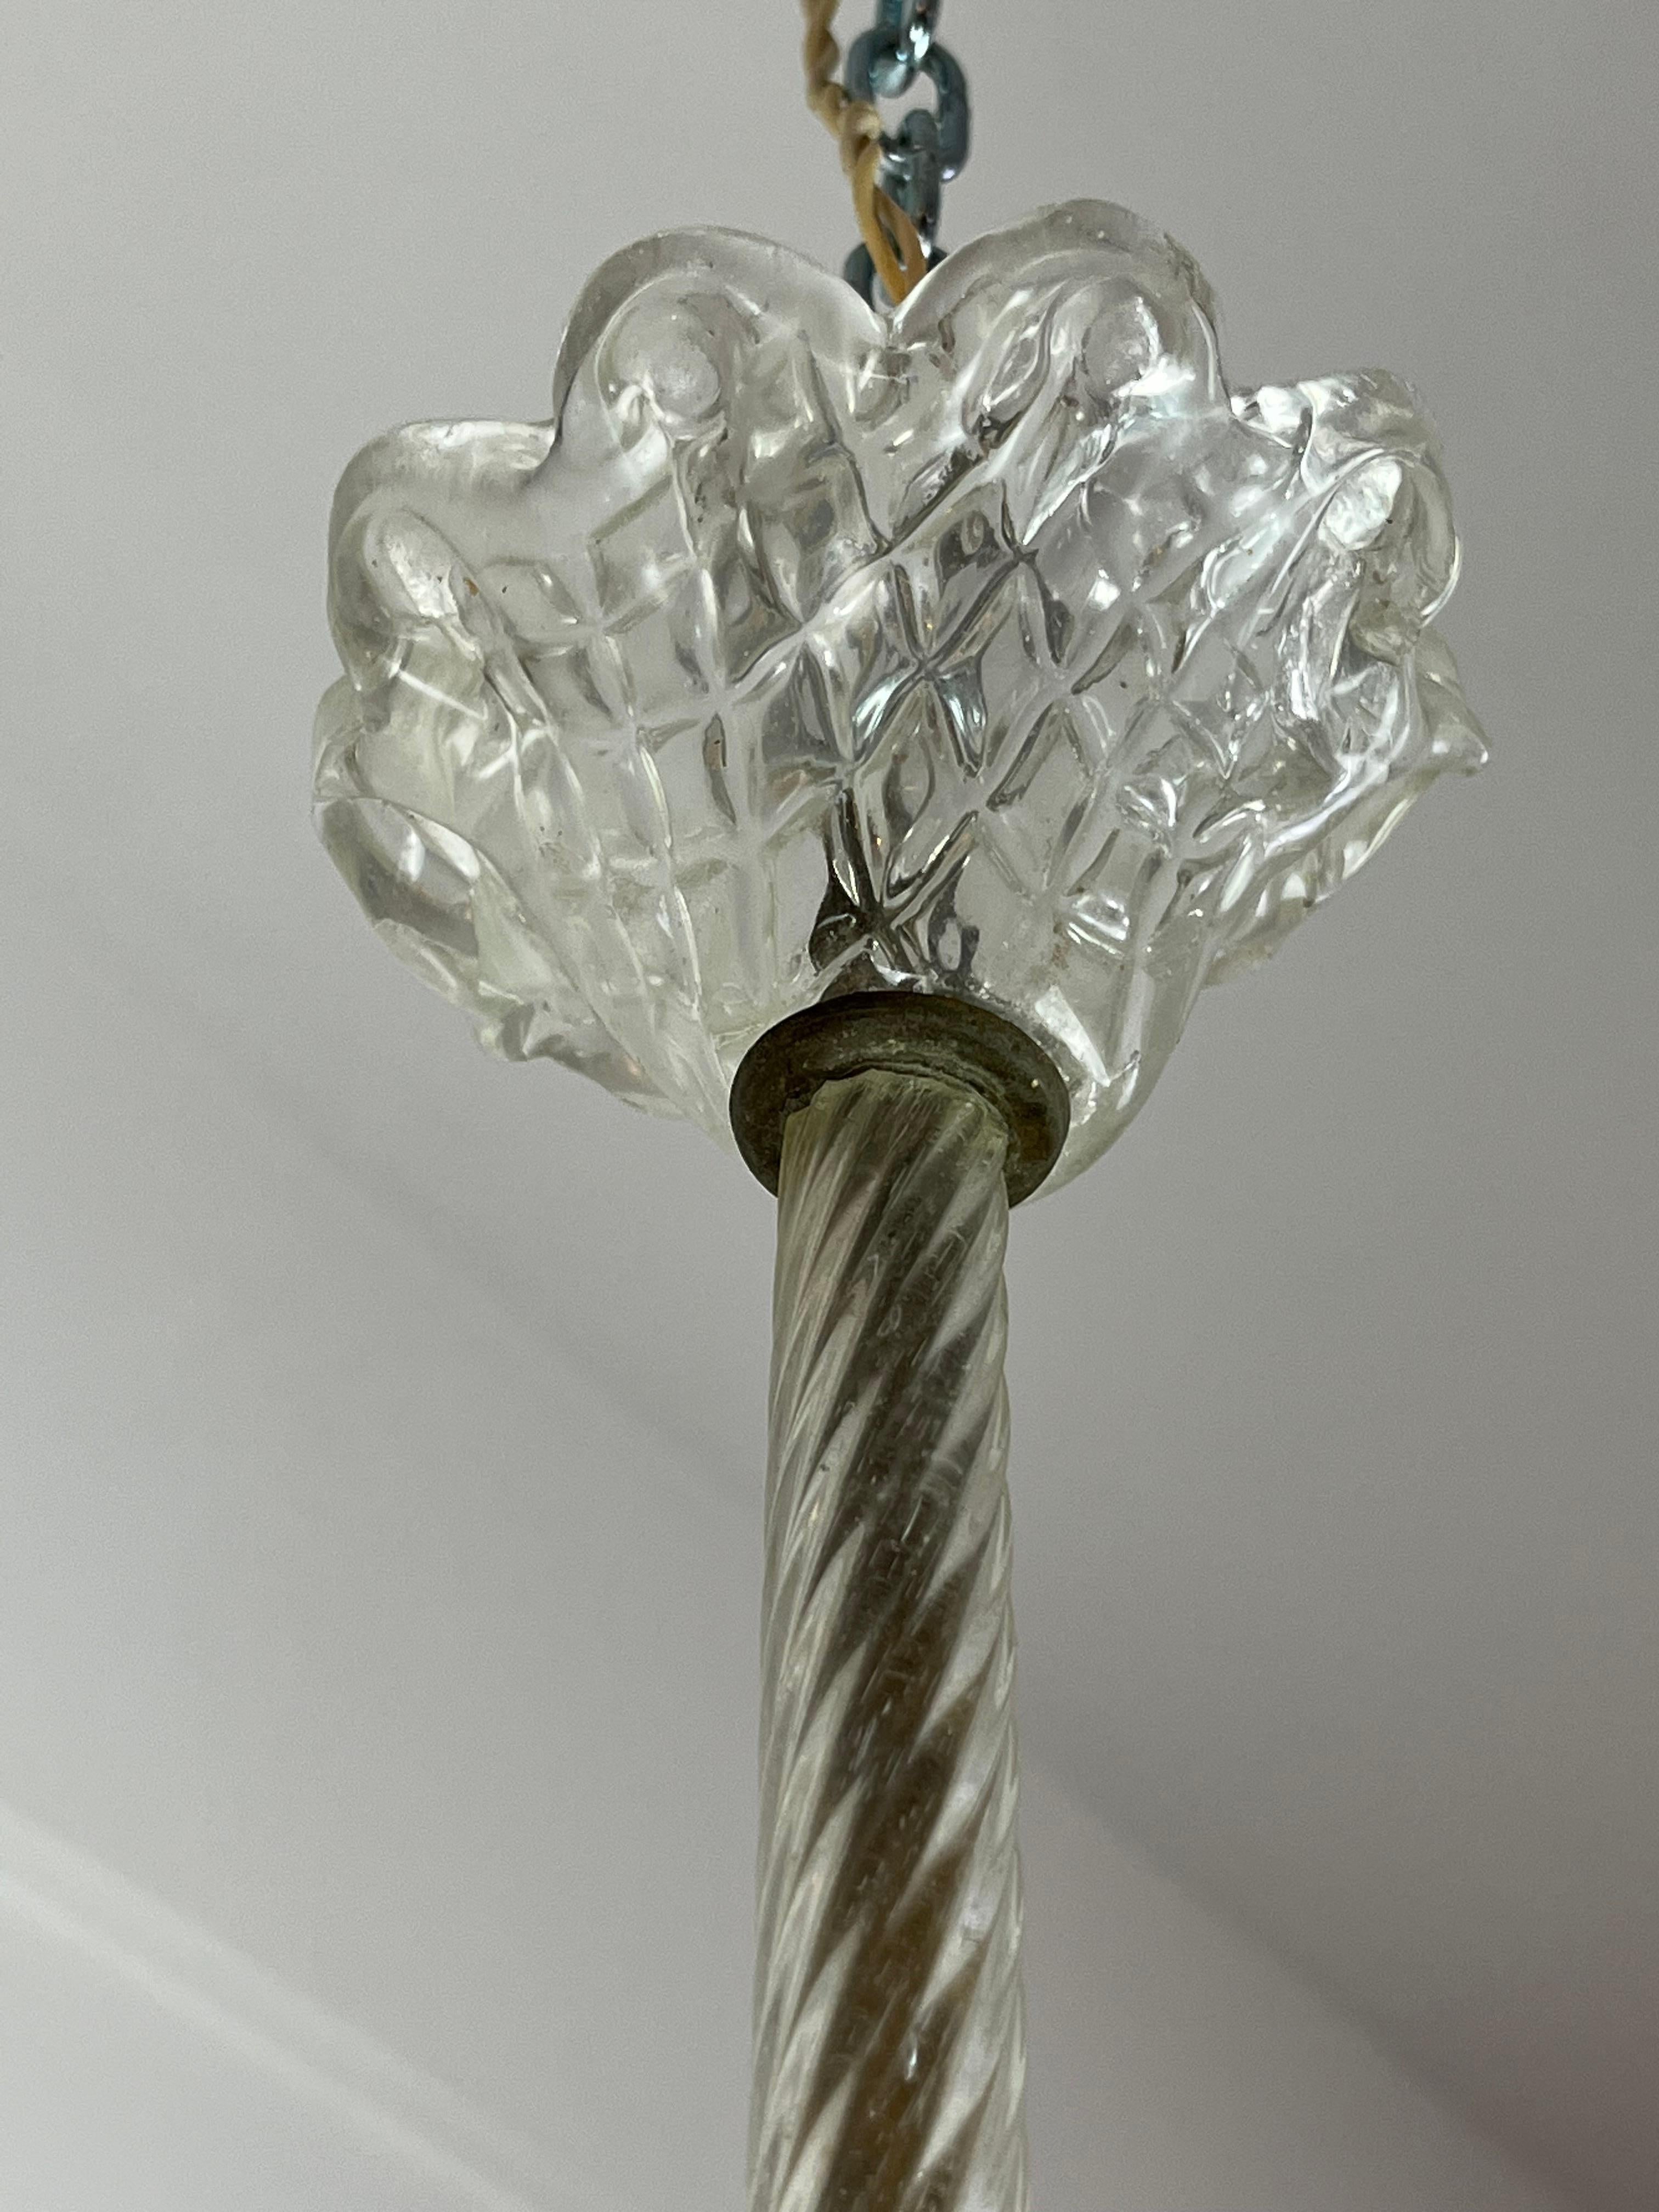 Murano Glass Chandelier, Barovier & Toso, Italy, 1940s For Sale 8